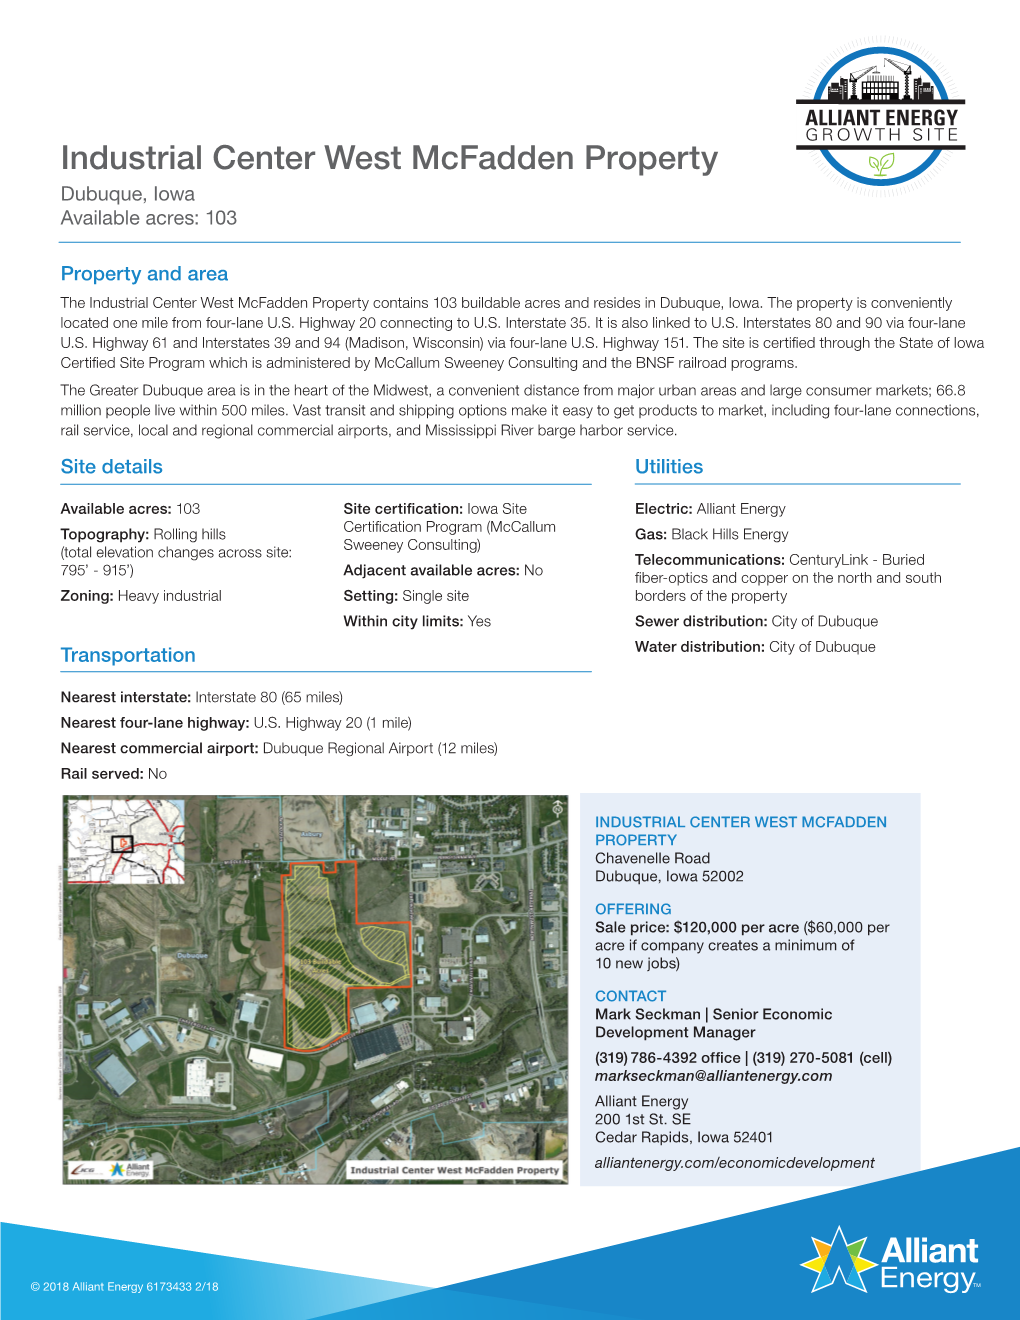 Industrial Center West Mcfadden Property Dubuque, Iowa Available Acres: 103